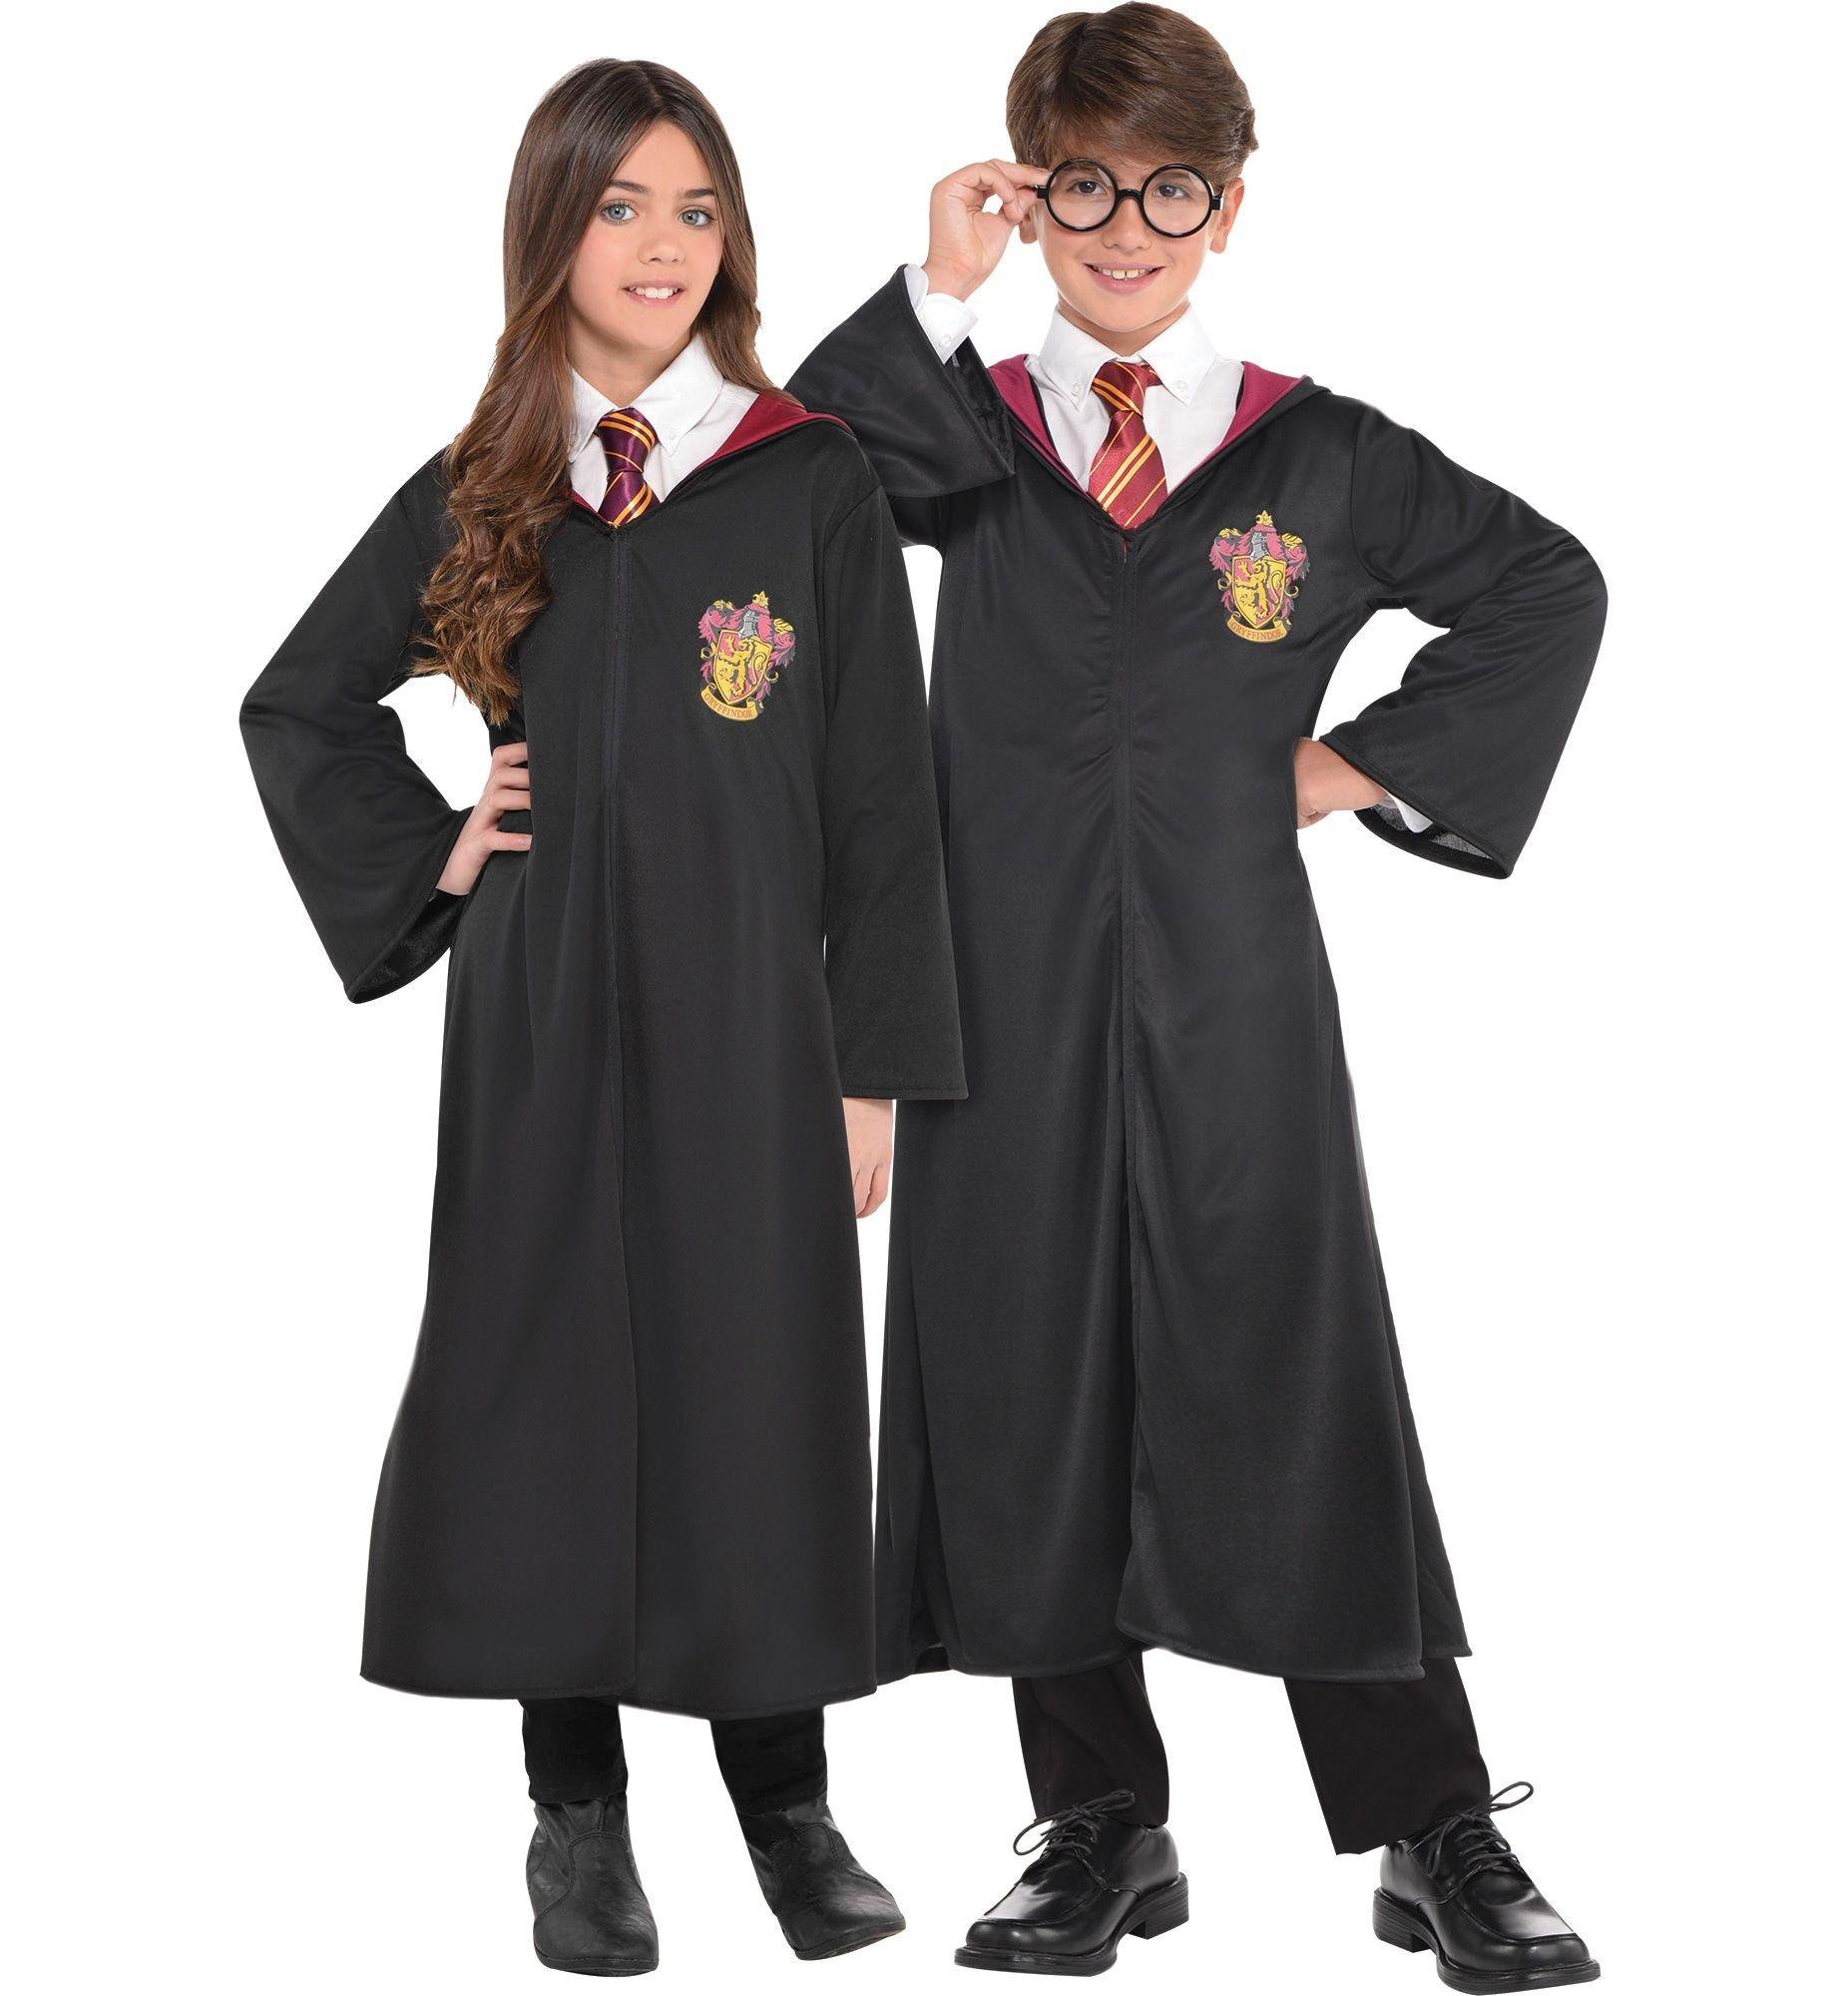 Harry Potter Robes: Gryffindor | Party City